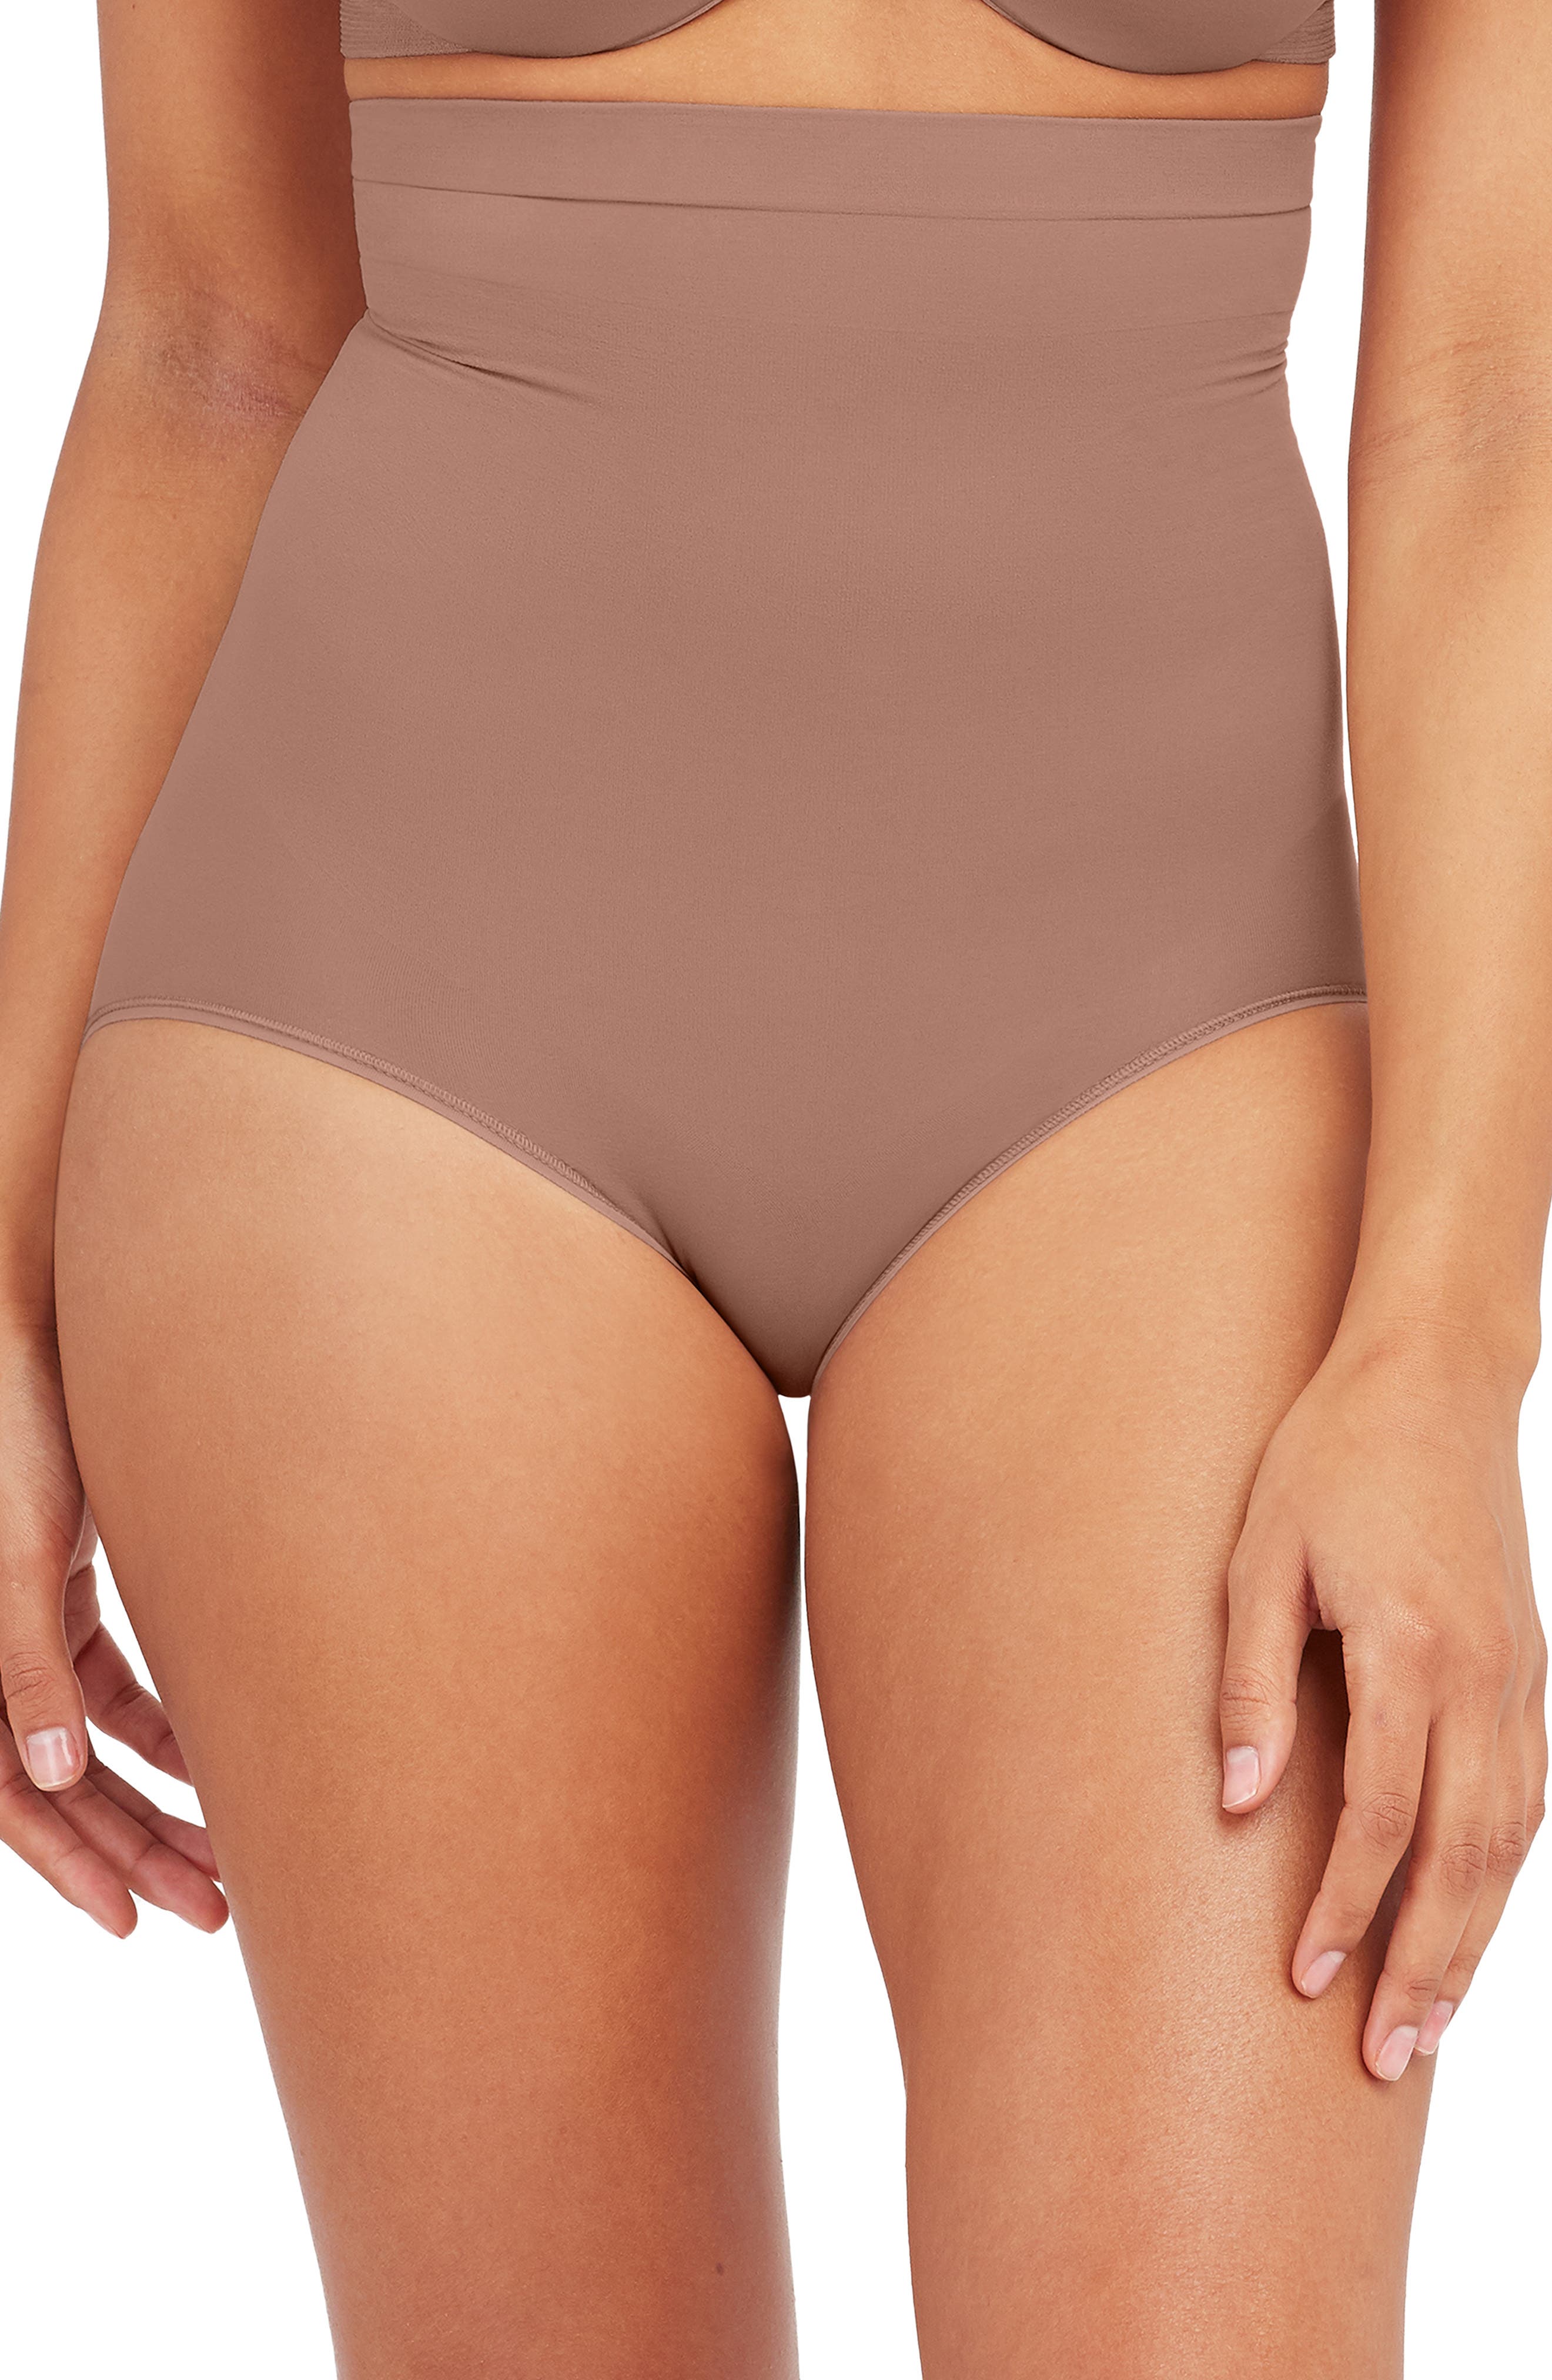 SPANX Slimproved Higher Power High Waisted Shaper Panties NEW